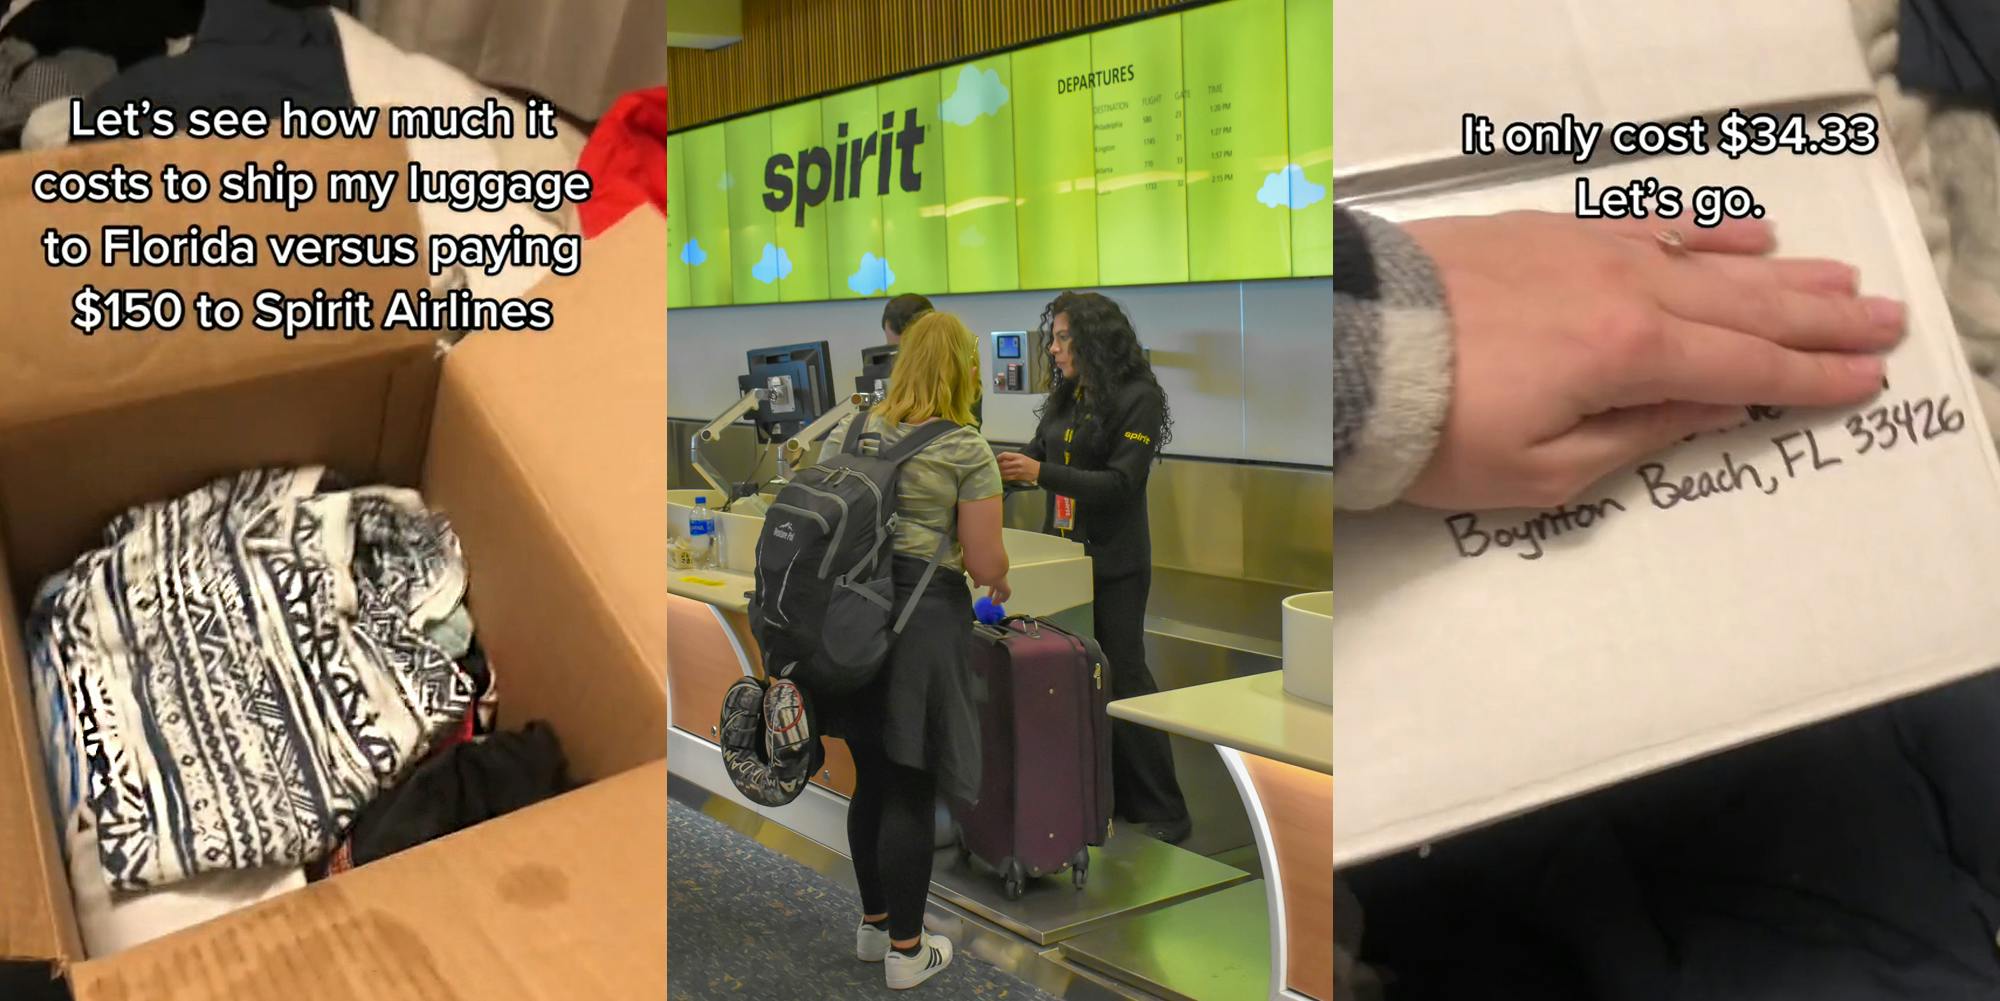 person packing shipping box with luggage with caption "Let's see how much it costs to ship my luggage to Florida versus paying $150 to Spirit Airlines" (l) woman with luggage at counter at Spirit airlines airport (c) hand on cardboard box heading to Florida with caption "It only cost $34.33 Let's go." (r)